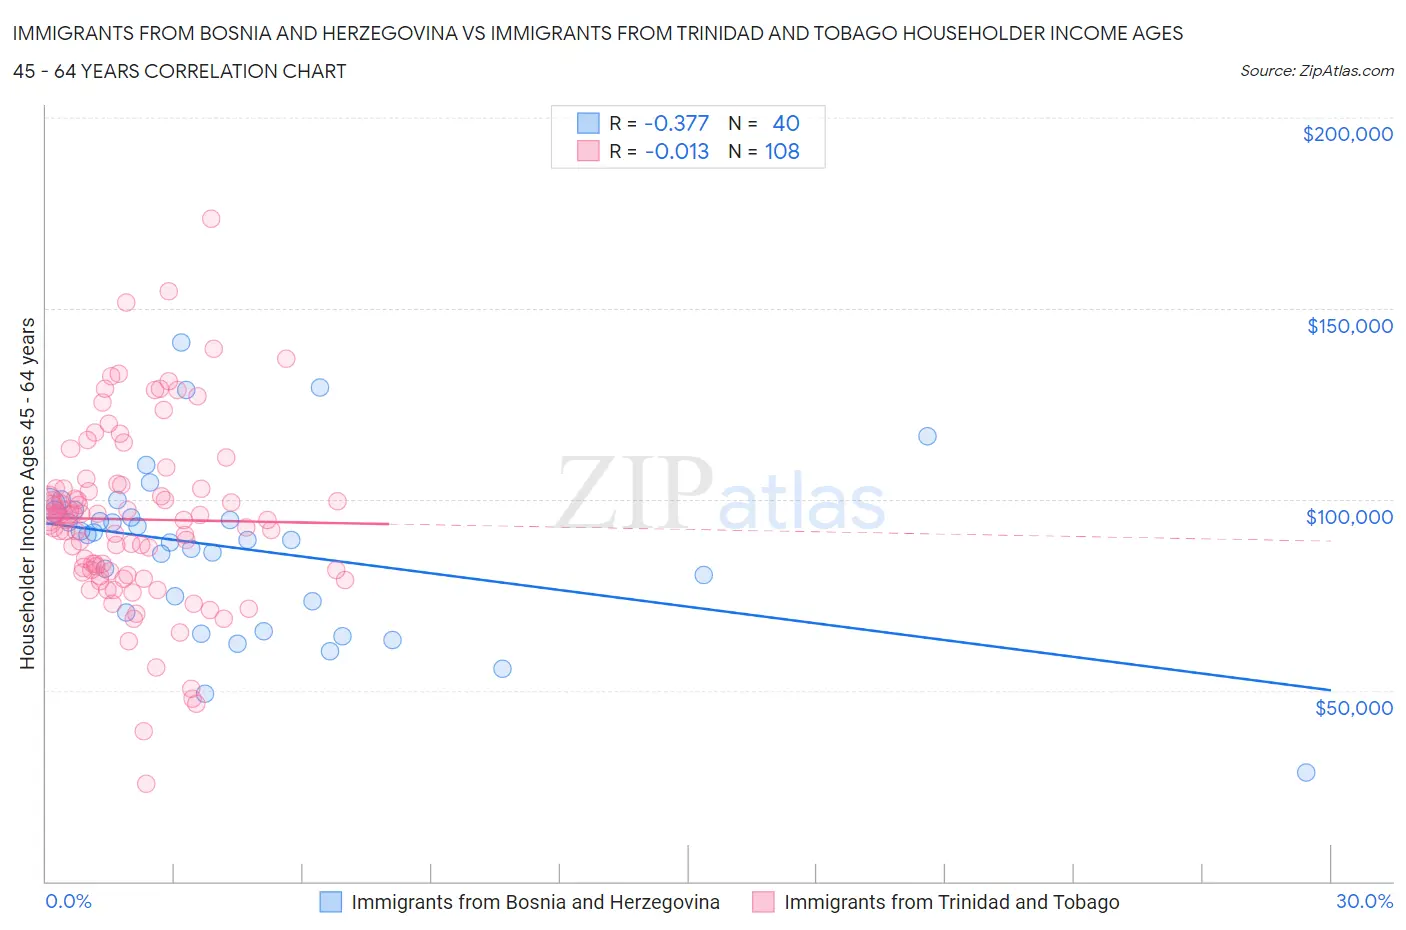 Immigrants from Bosnia and Herzegovina vs Immigrants from Trinidad and Tobago Householder Income Ages 45 - 64 years